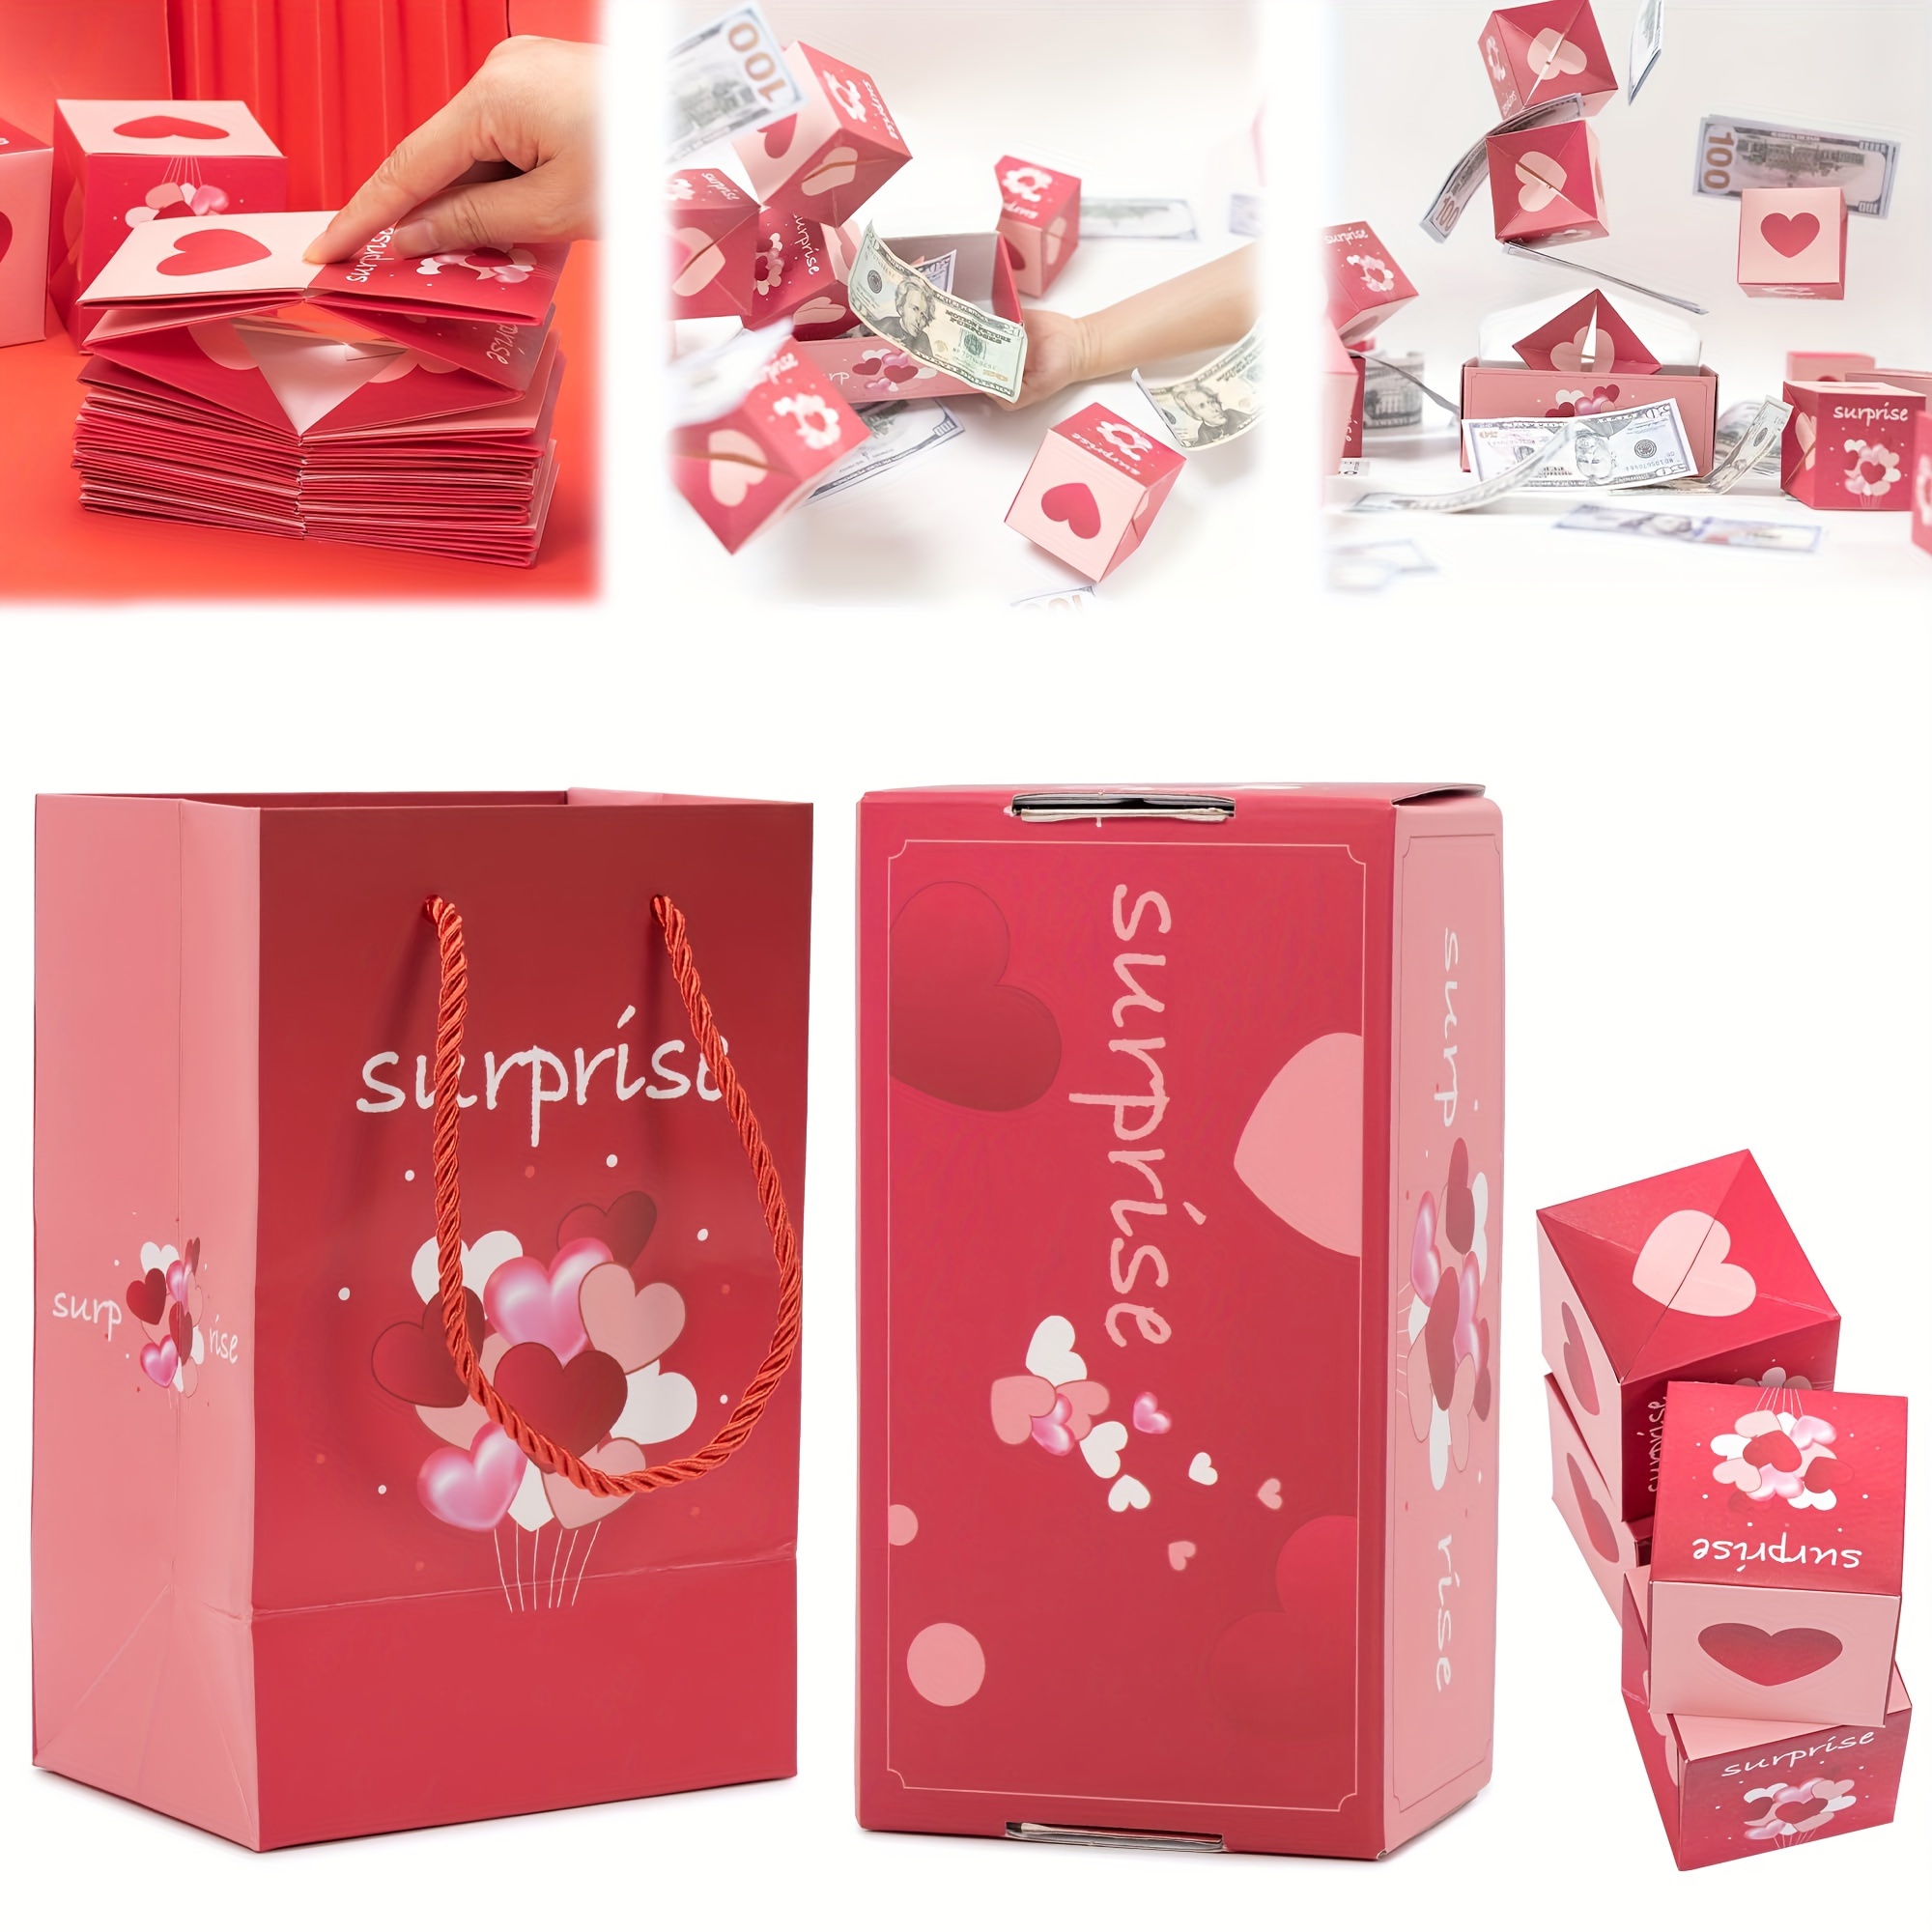 Surprise Box Gift Box - Creating The Most Surprising Gift, Creativity  Folding Bouncing Red Envelope Gift Box, Surprise Bounce Gift Box, Storage